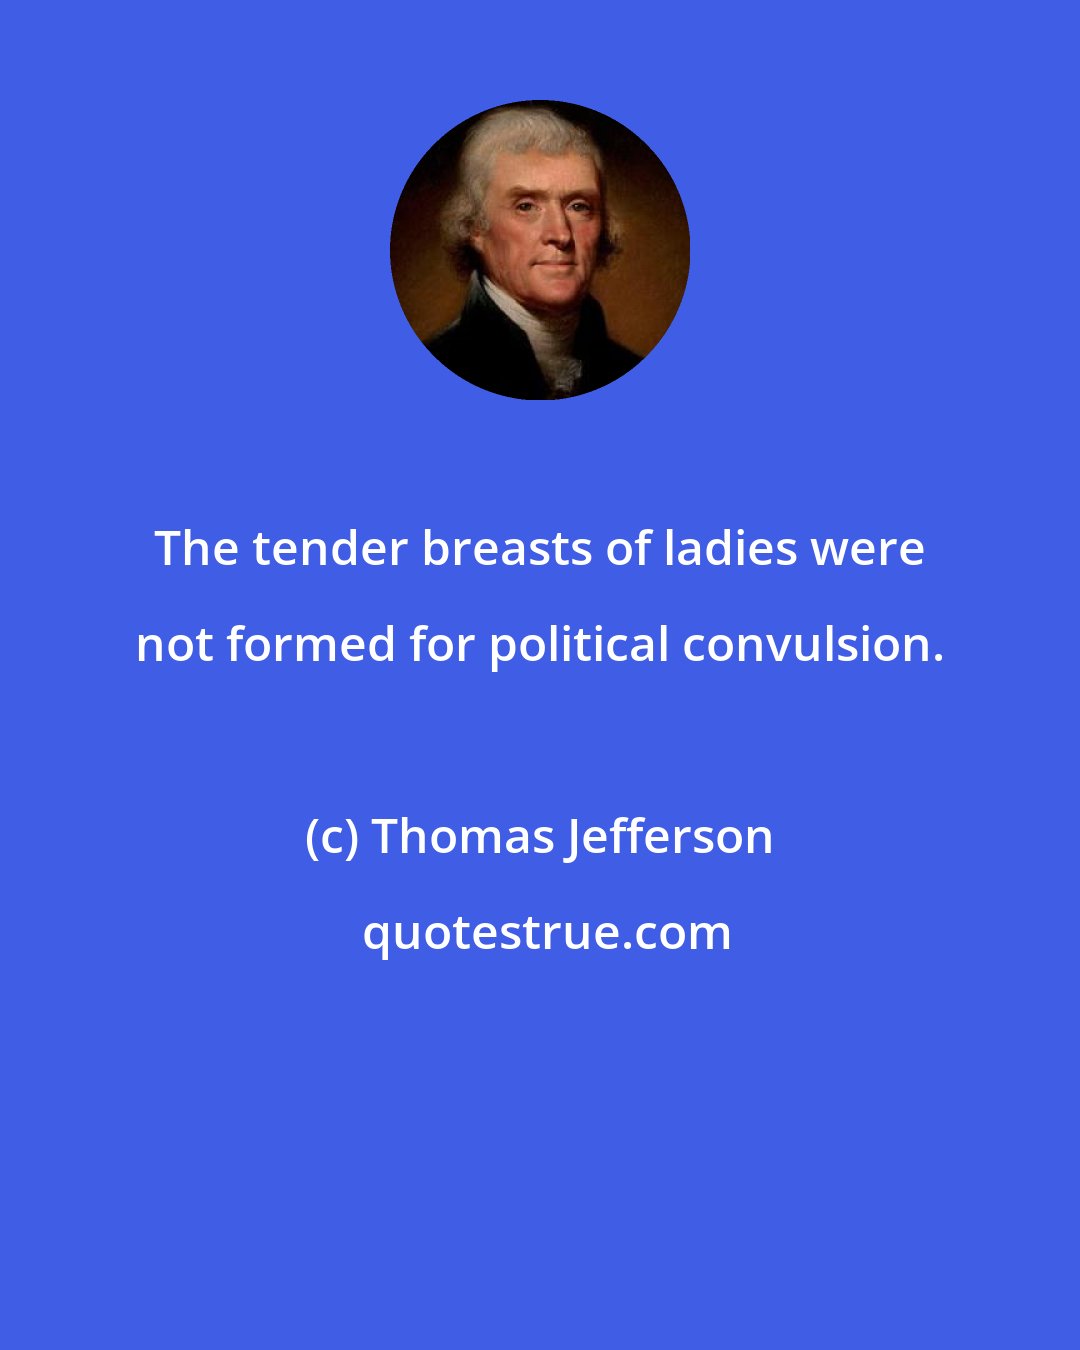 Thomas Jefferson: The tender breasts of ladies were not formed for political convulsion.